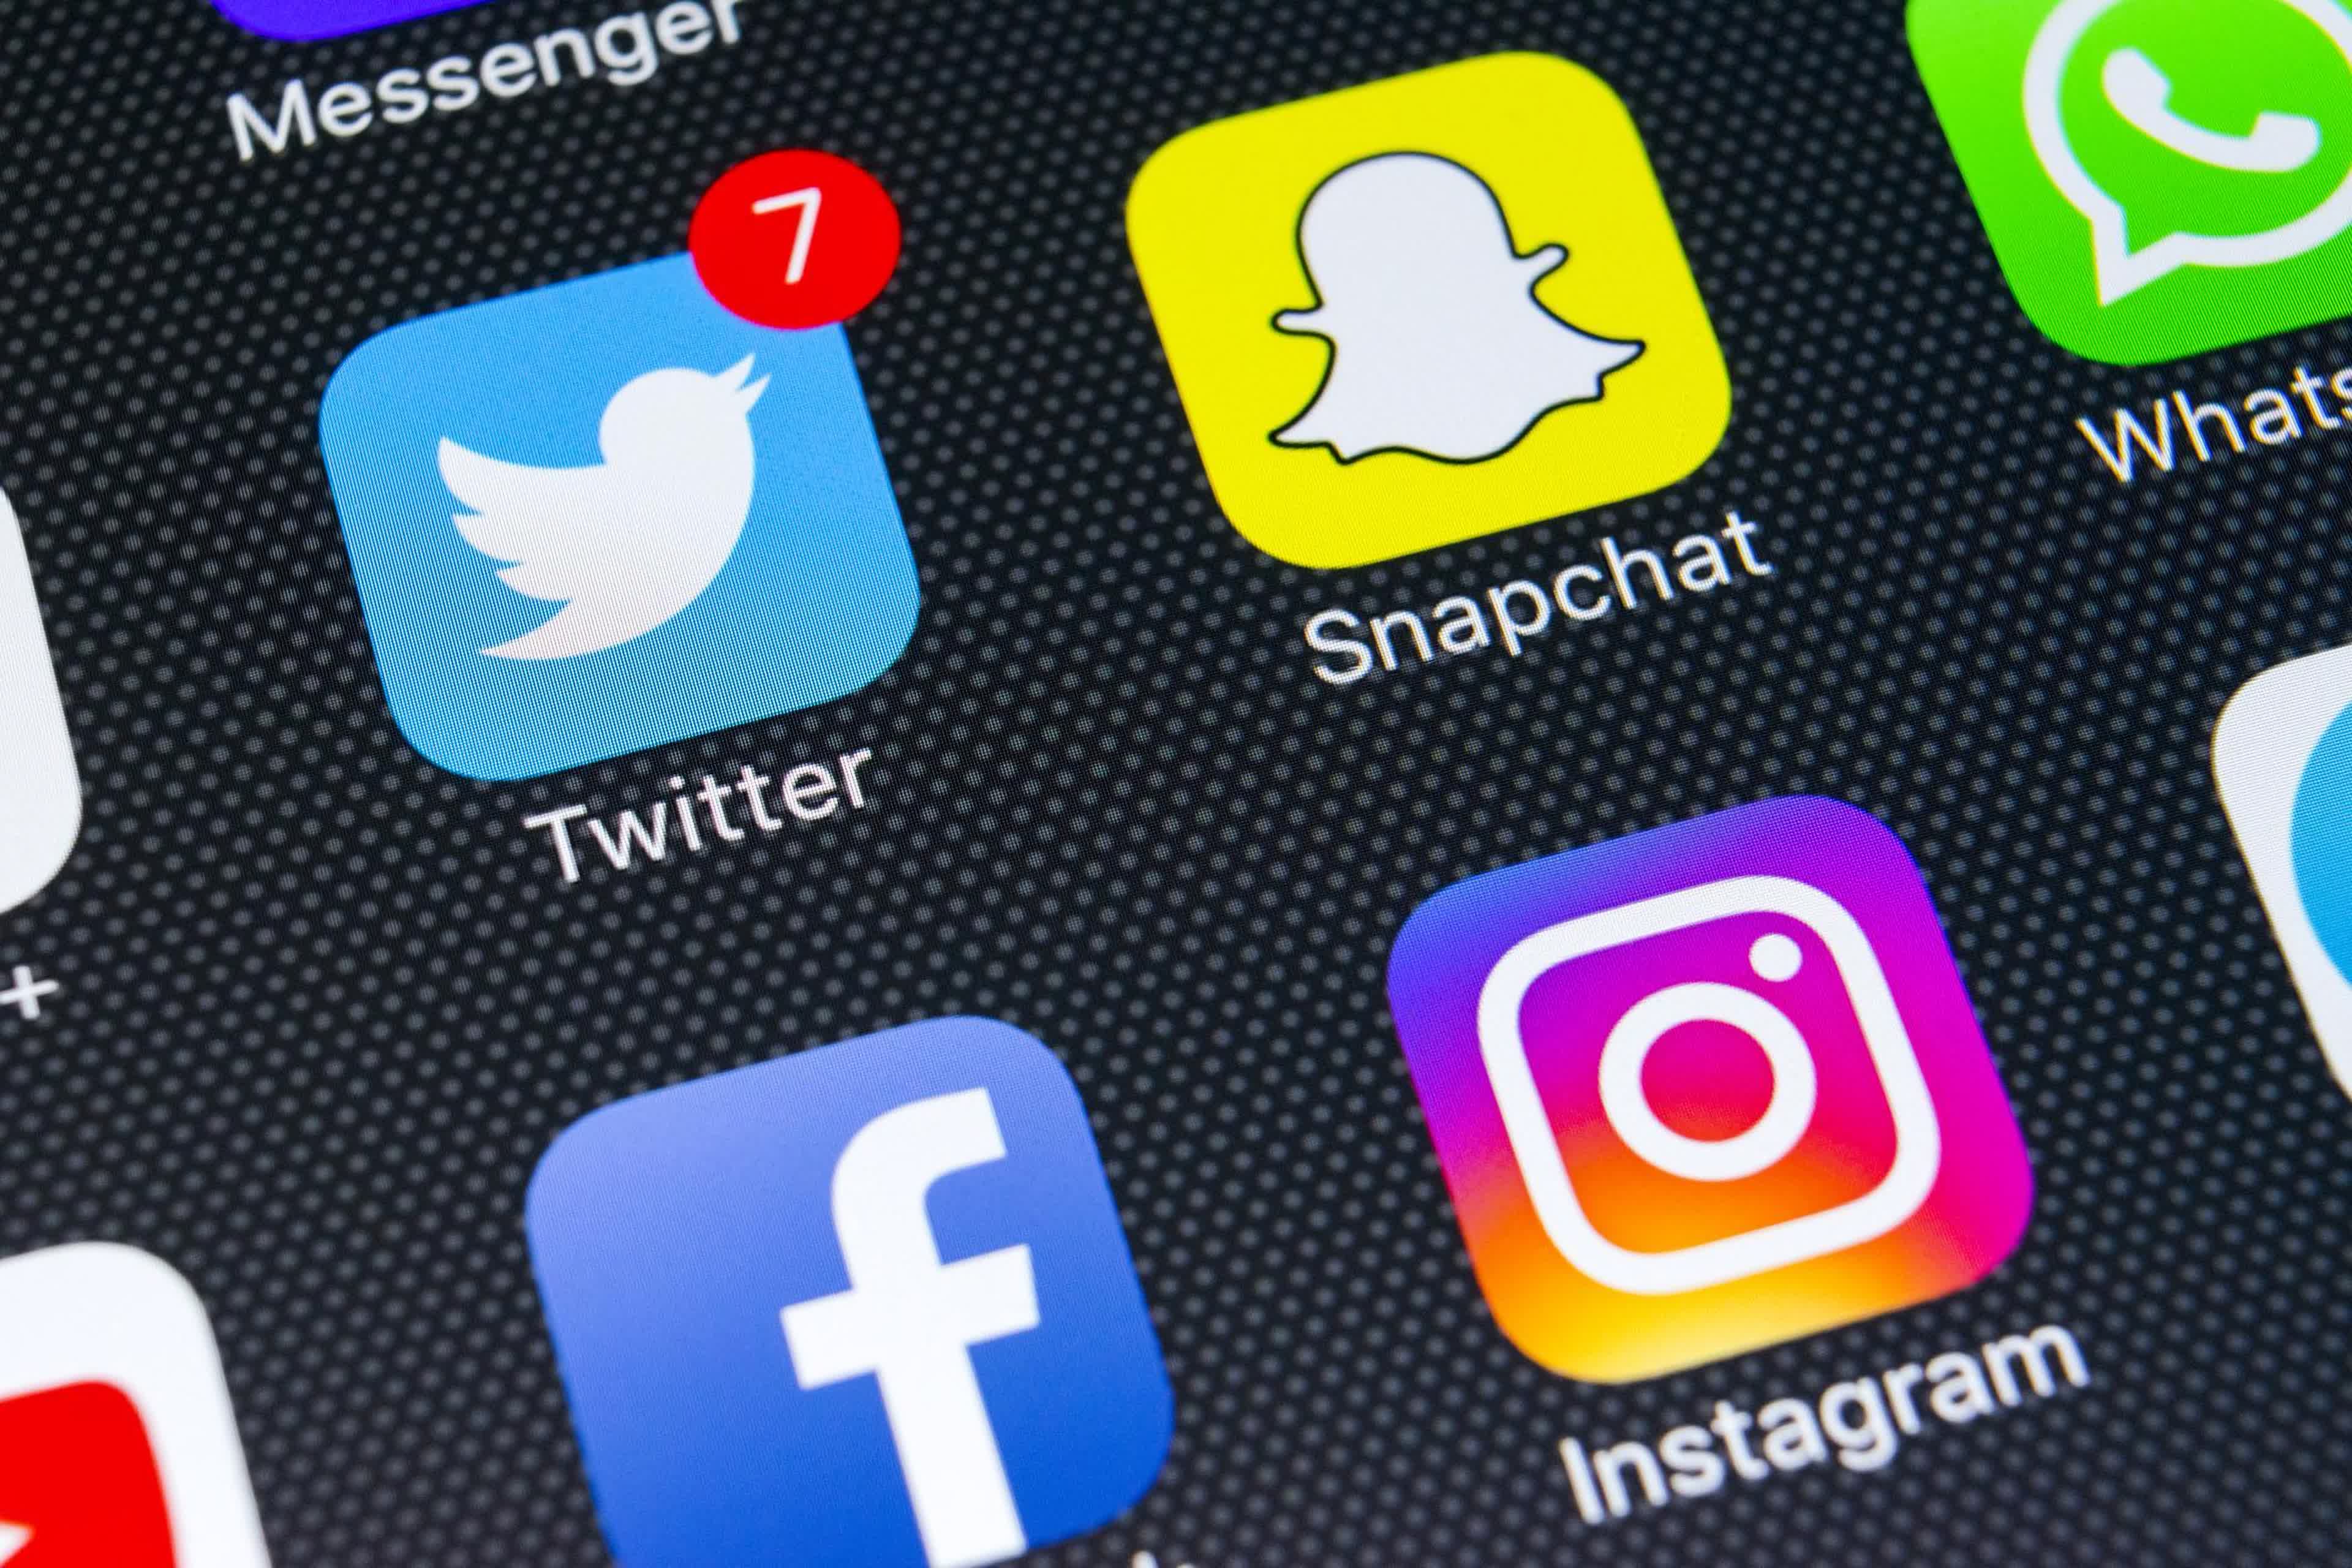 Twitter and Snap saw record revenue growth in Q2